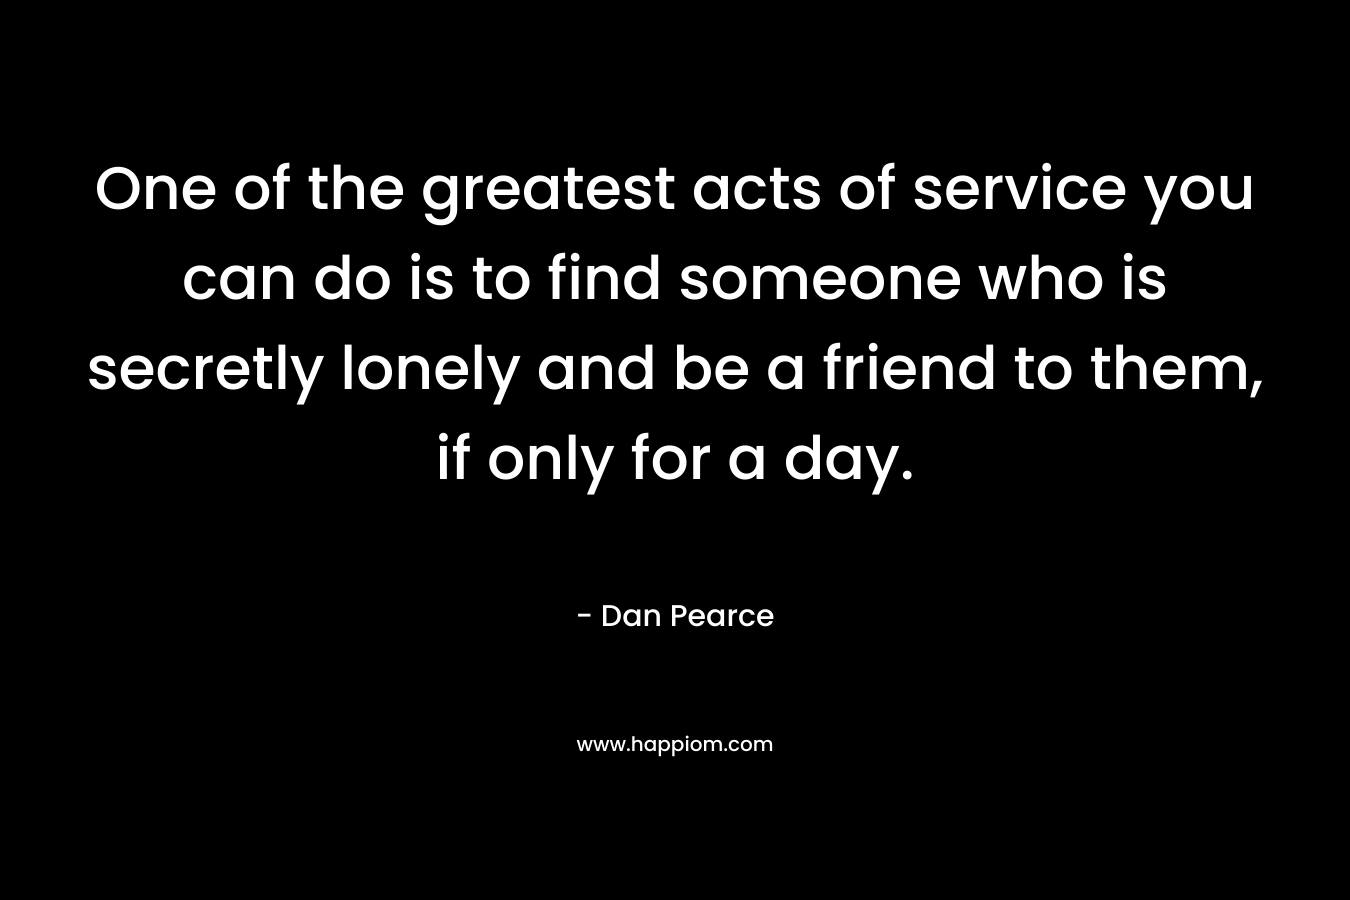 One of the greatest acts of service you can do is to find someone who is secretly lonely and be a friend to them, if only for a day.